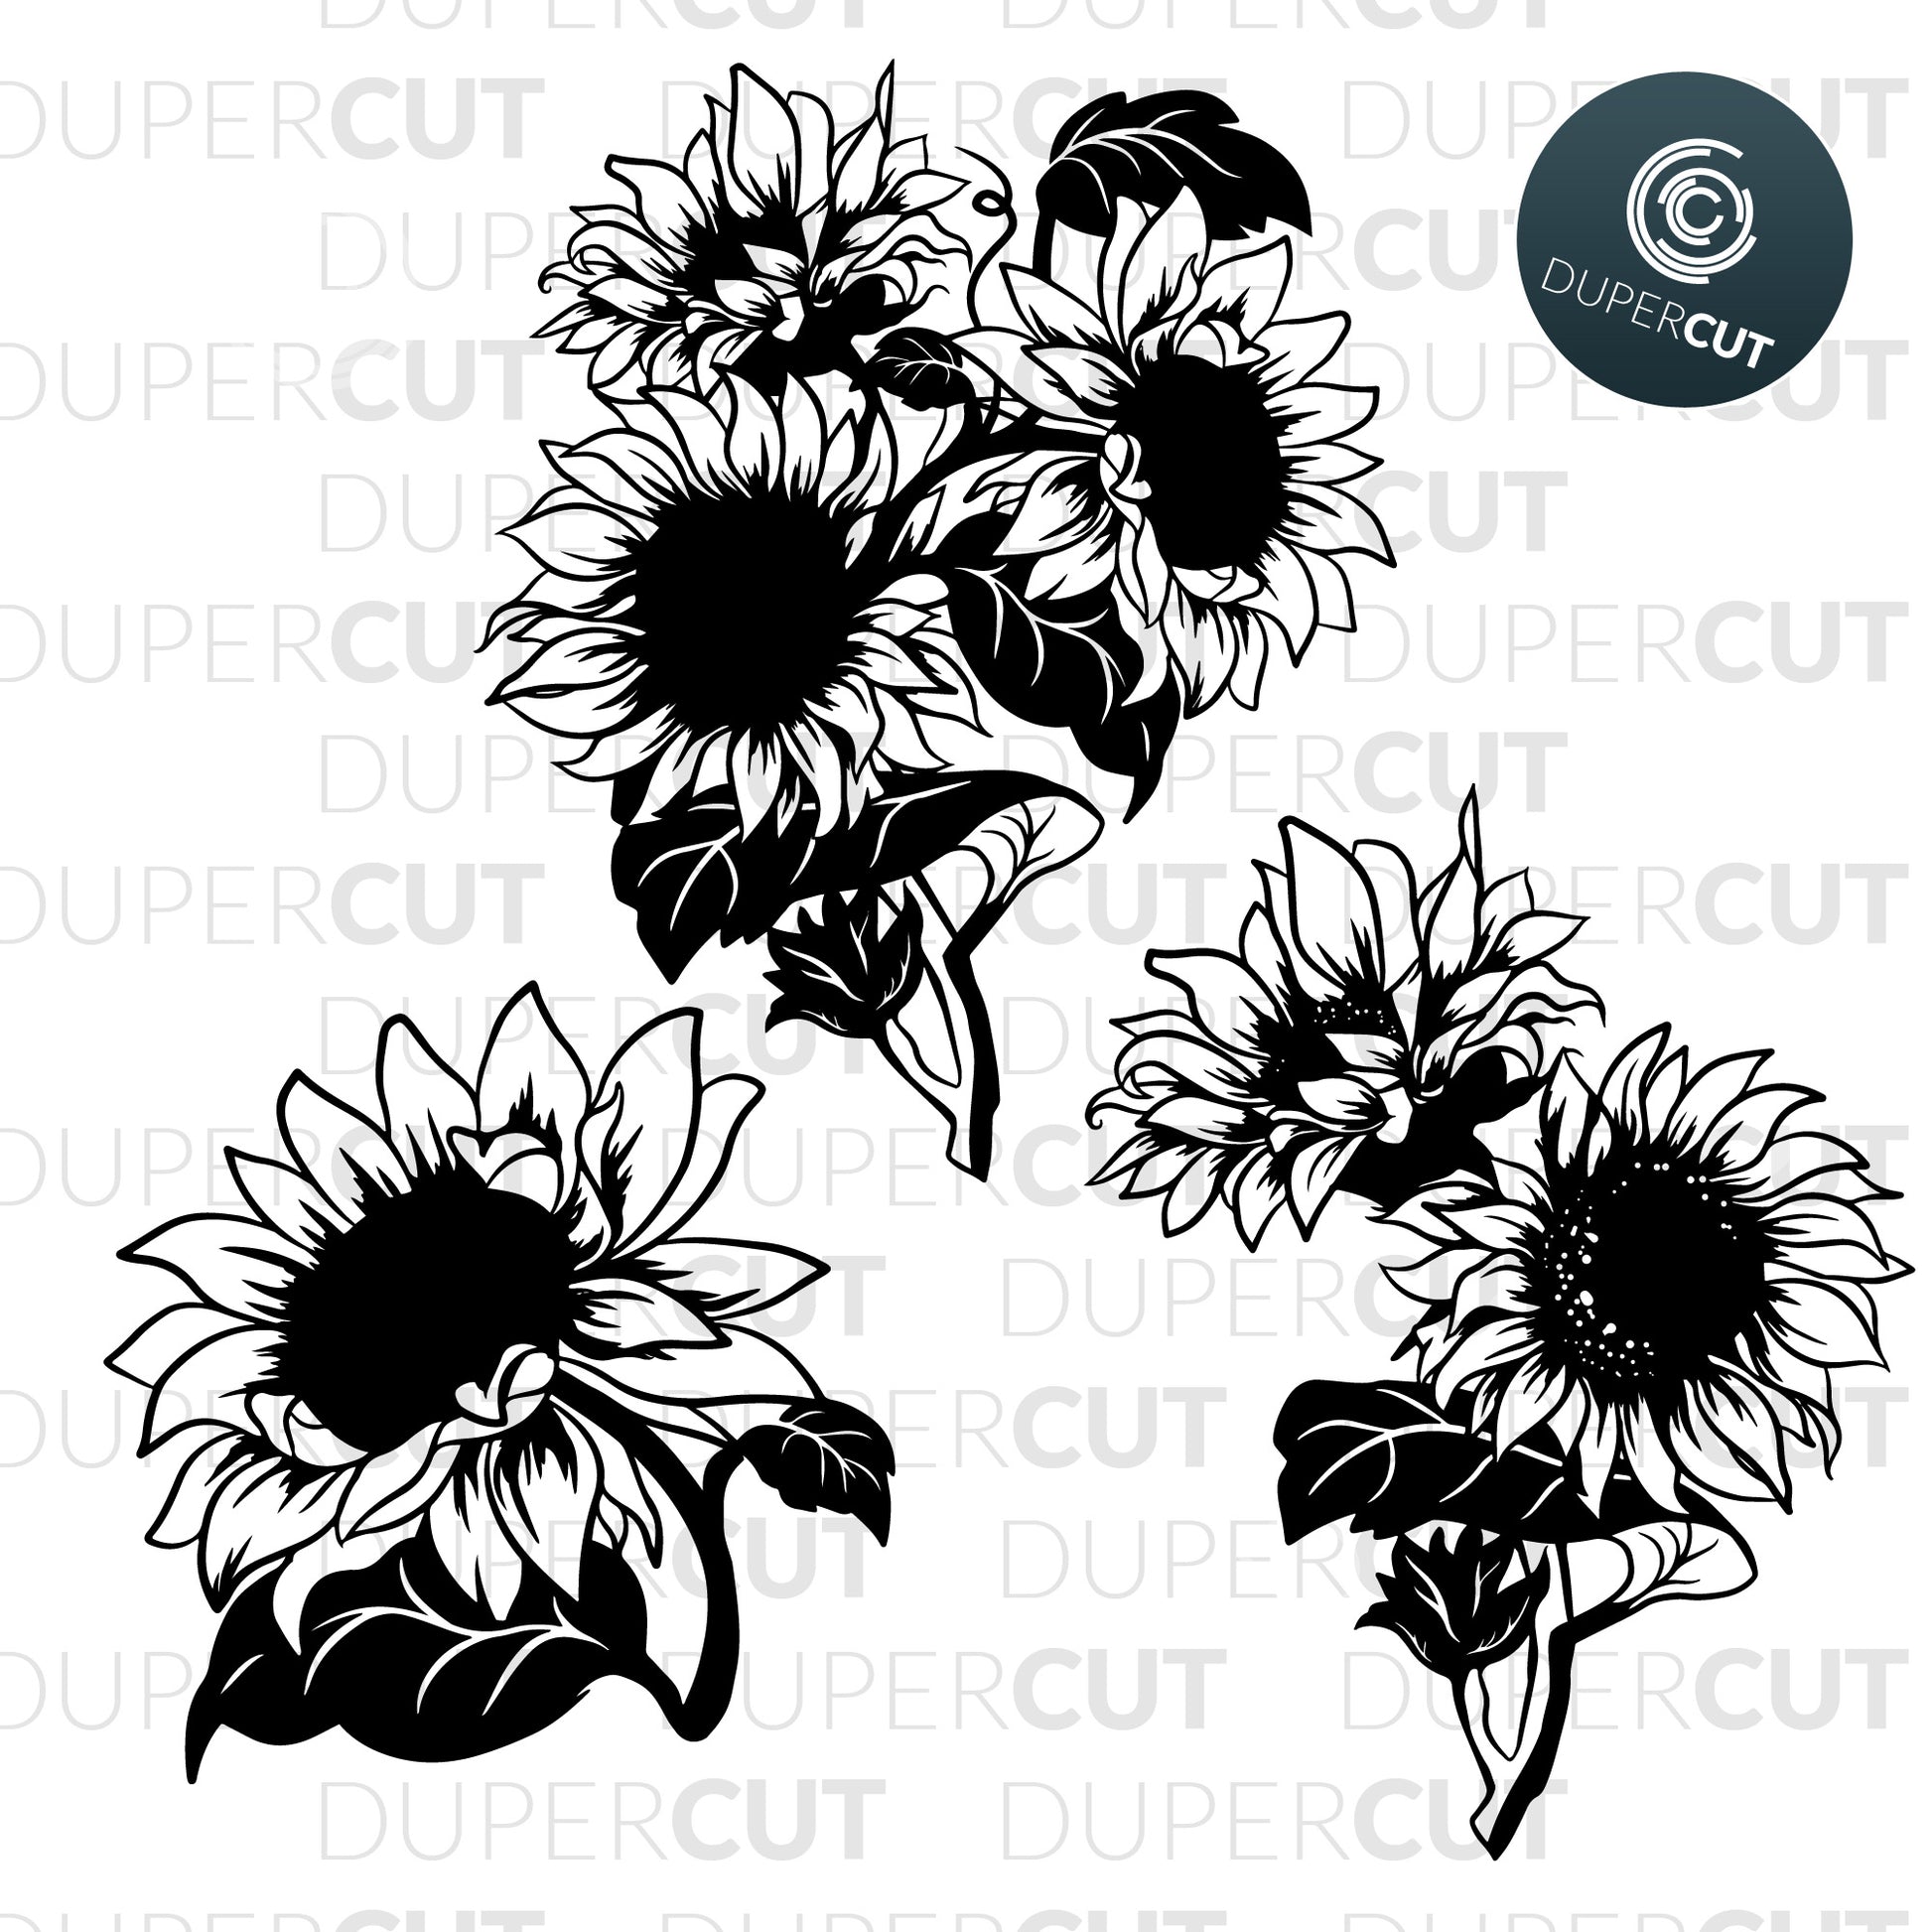 Sunflower vector line drawing, tattoo style  template - SVG DXF PNG files for Cricut, Glowforge, Silhouette Cameo, CNC Machines